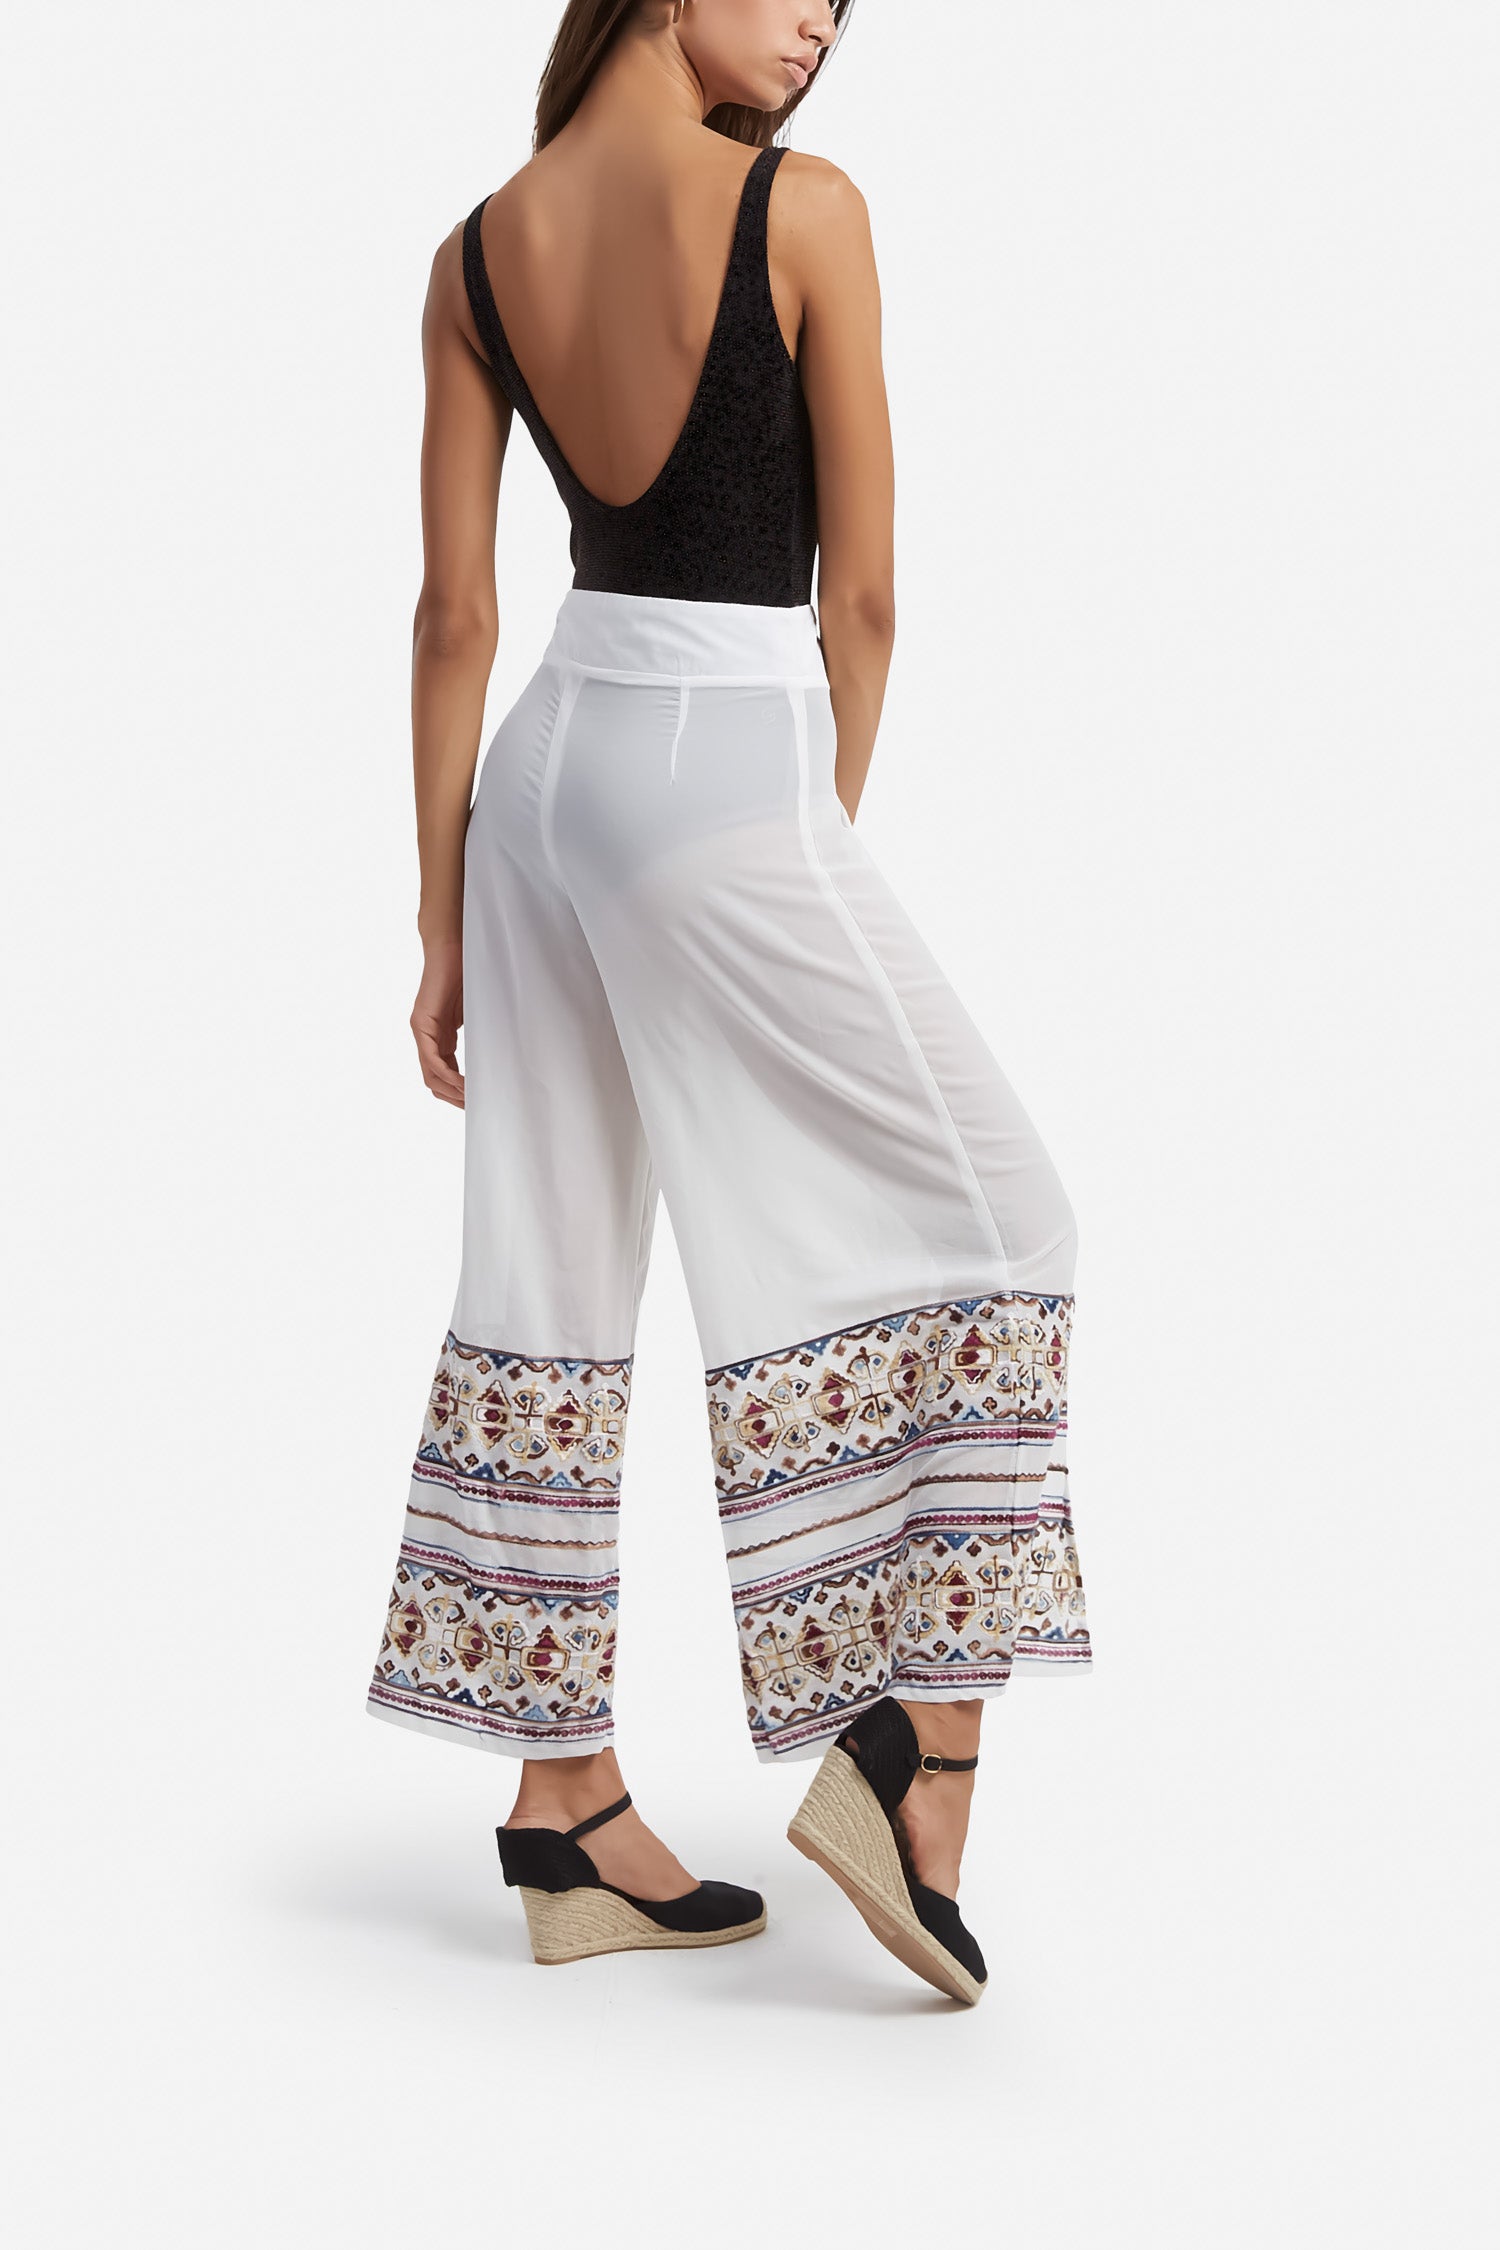 Embroided Coverup Pants Women Pants By C Clothing 